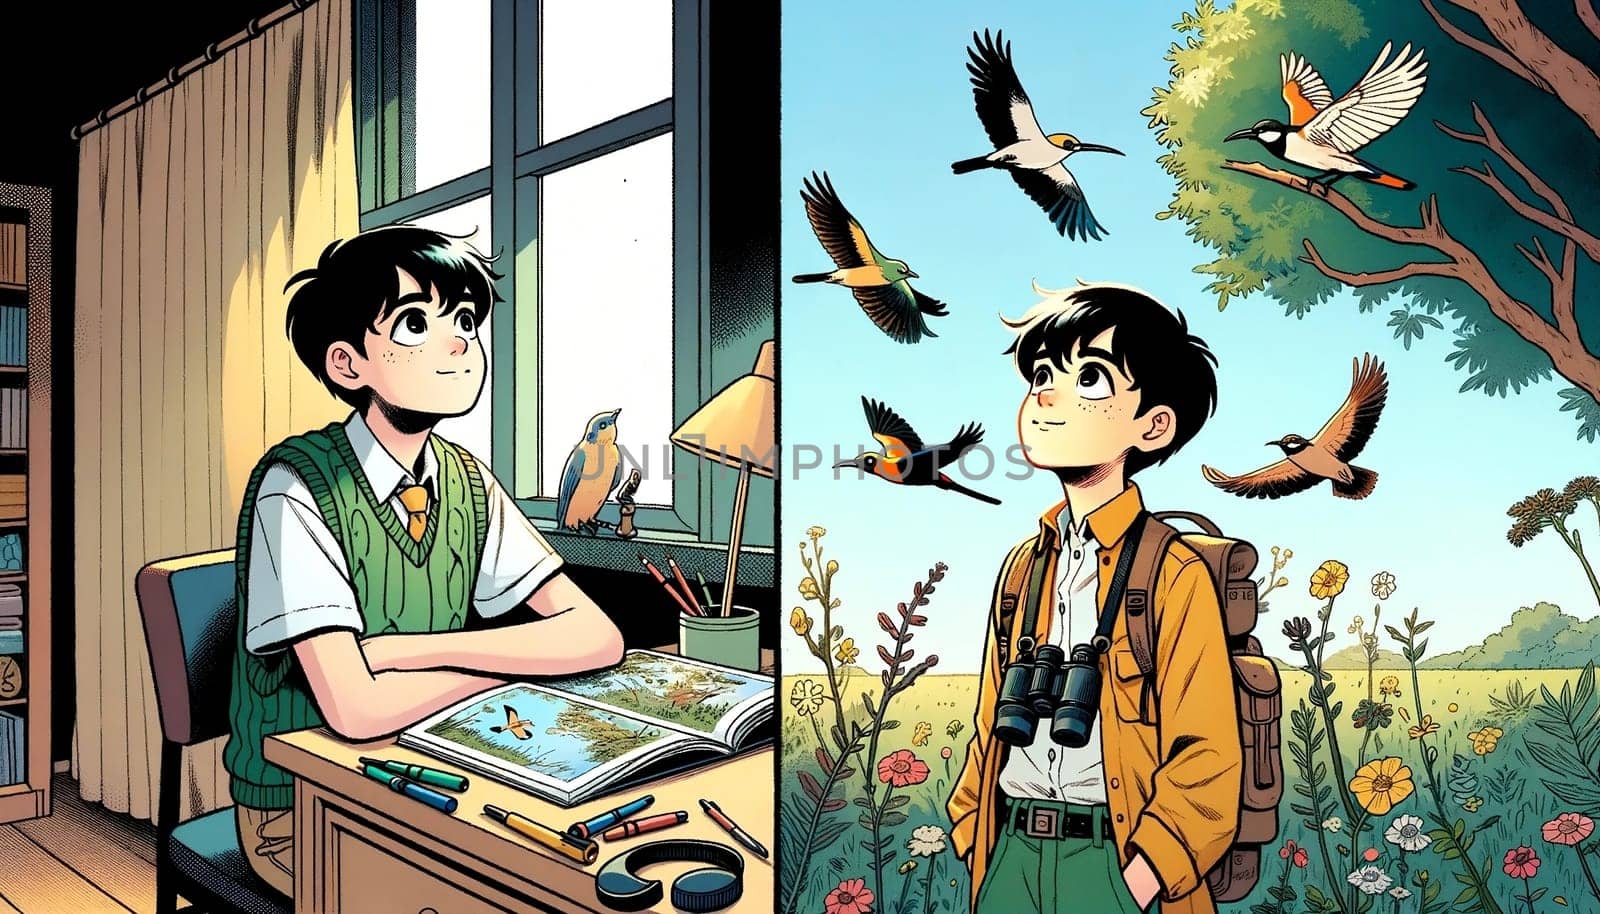 A boy is sitting at a desk and dreaming about birds, Birder Dream Goals scene by SweCreatives